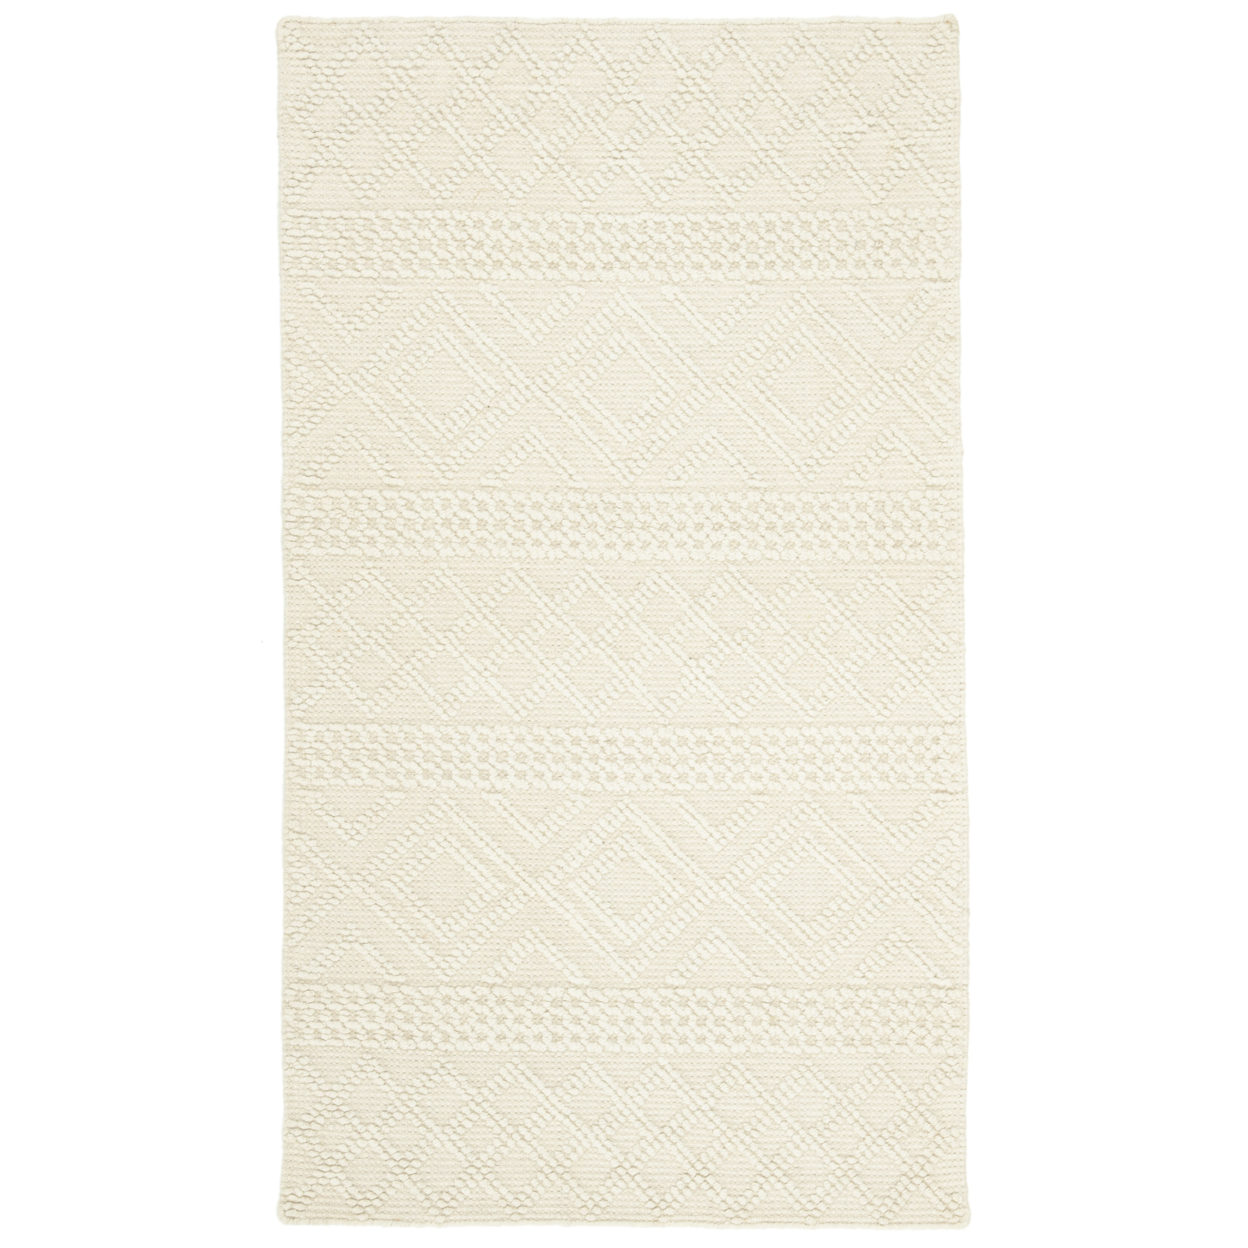 SAFAVIEH Vermont Collection VRM211A Handwoven Ivory Rug - 4' Square